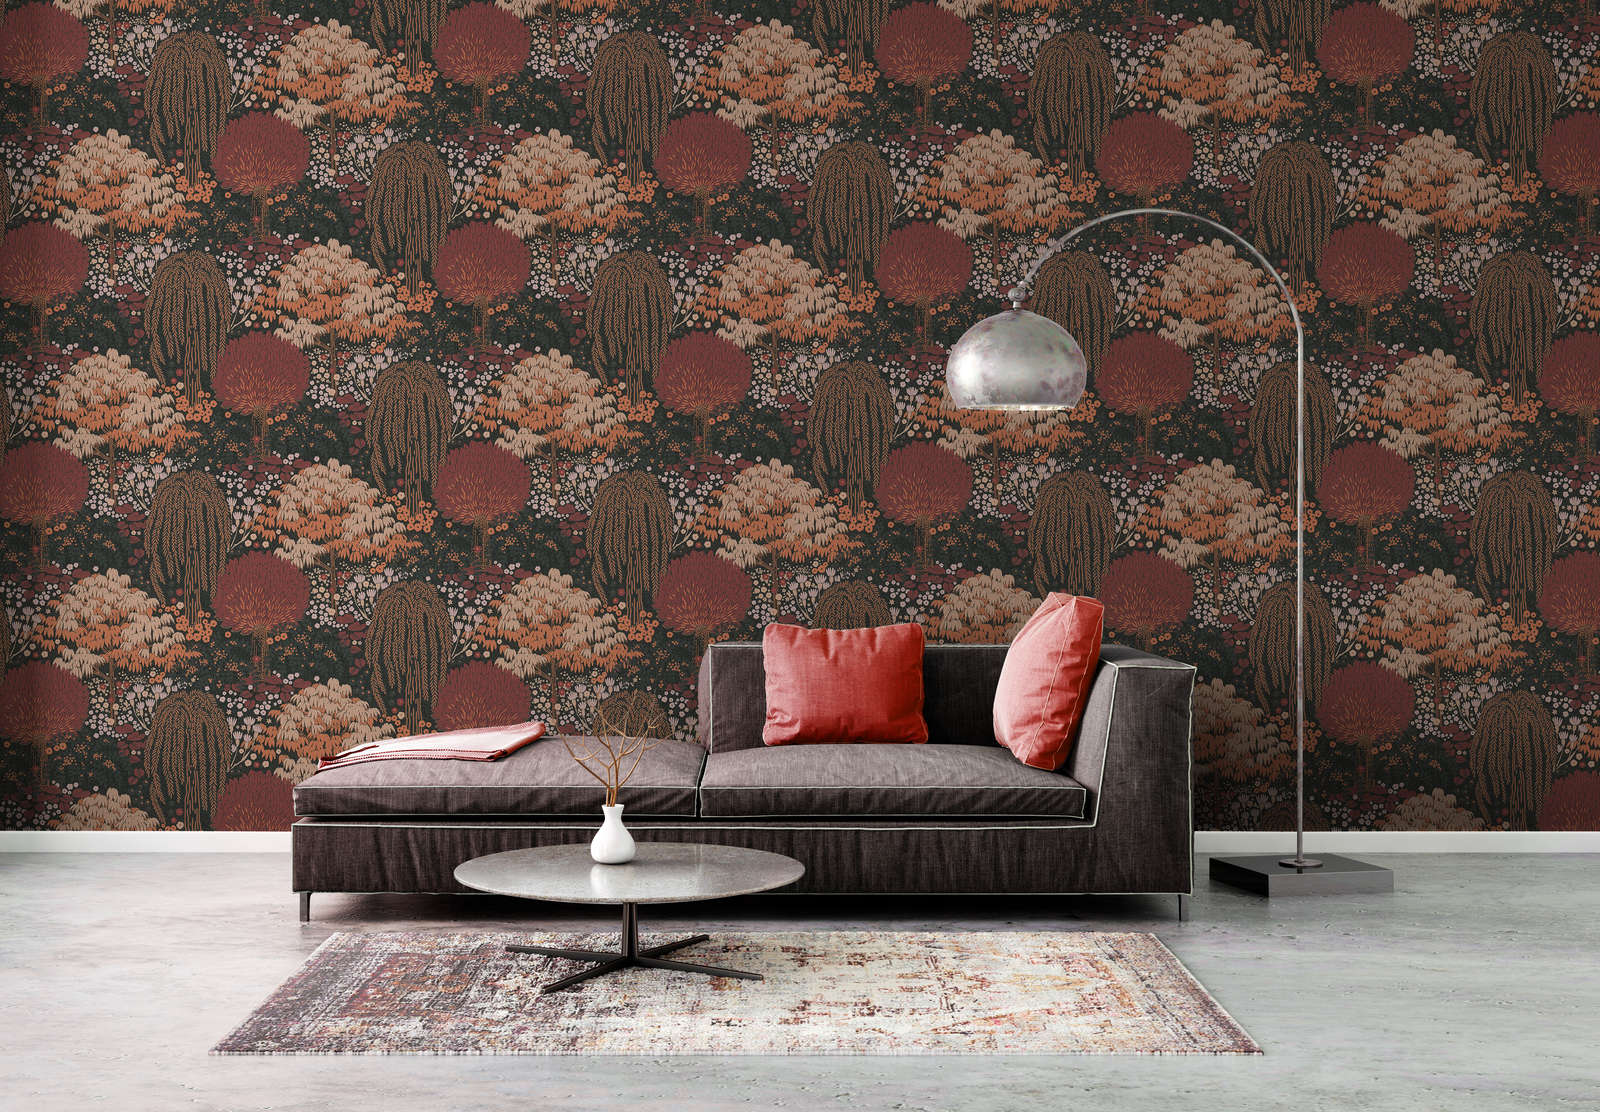             Non-woven wallpaper floral with leaves light textured, matt - black, red, pink
        